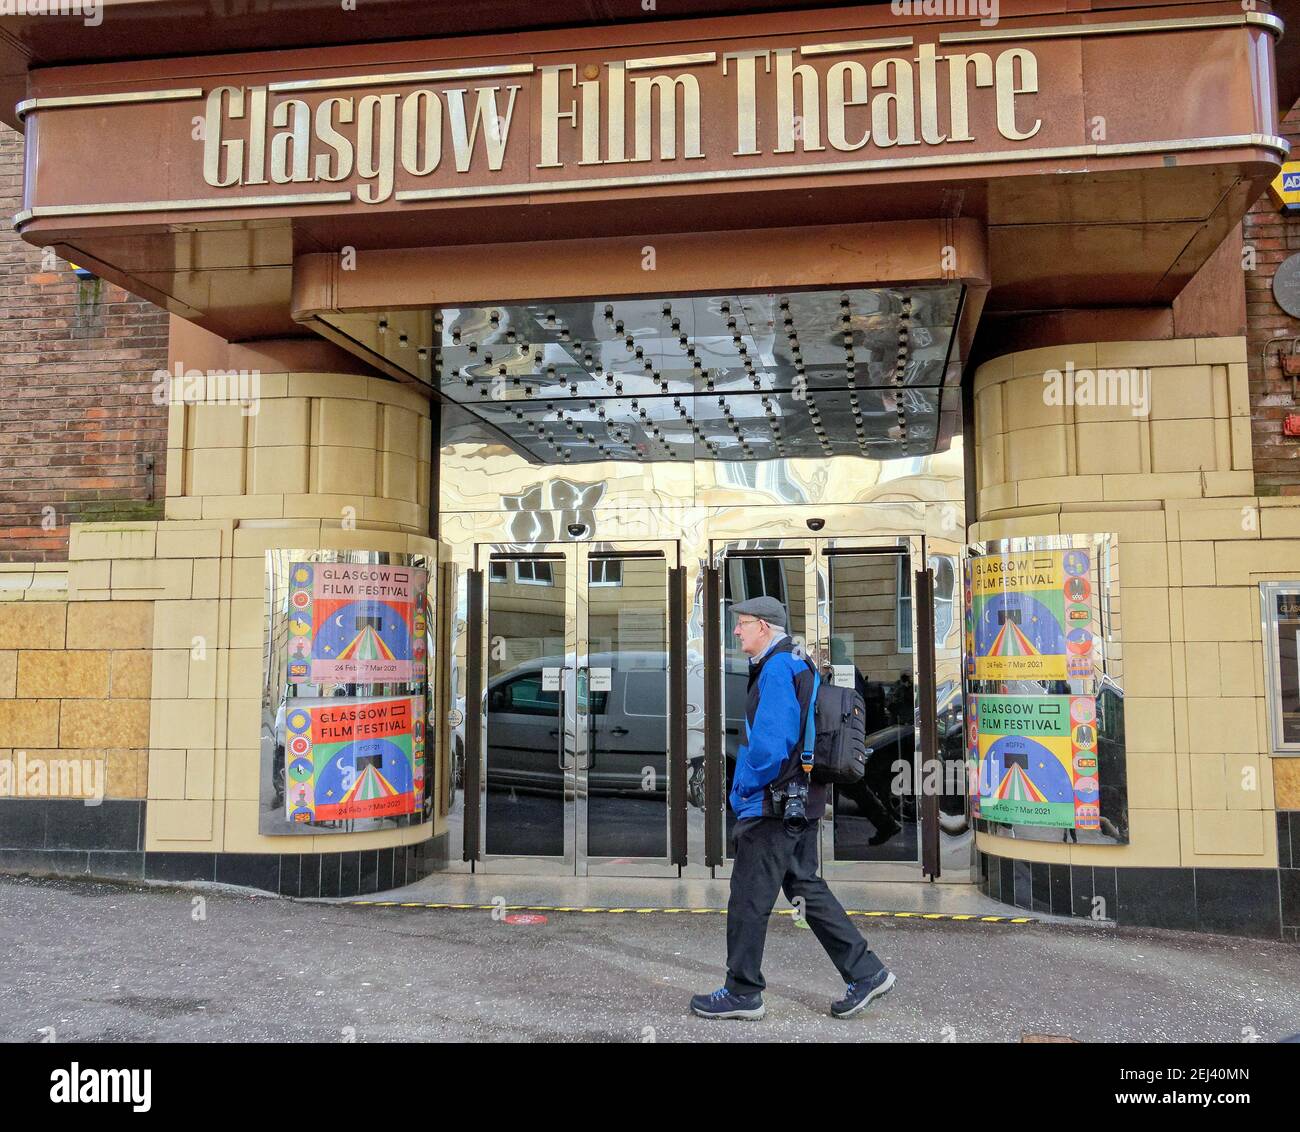 Glasgow, Scotland, UK, 21st February, 2021, Lockdown is now 11 months in various forms and the latest total lockdown sees an empty town despite the sunny weather. The glasgow film festival goes ahead next week online as the normal venue of gft remains closed. Credit Gerard Ferry/Alamy Live News Stock Photo